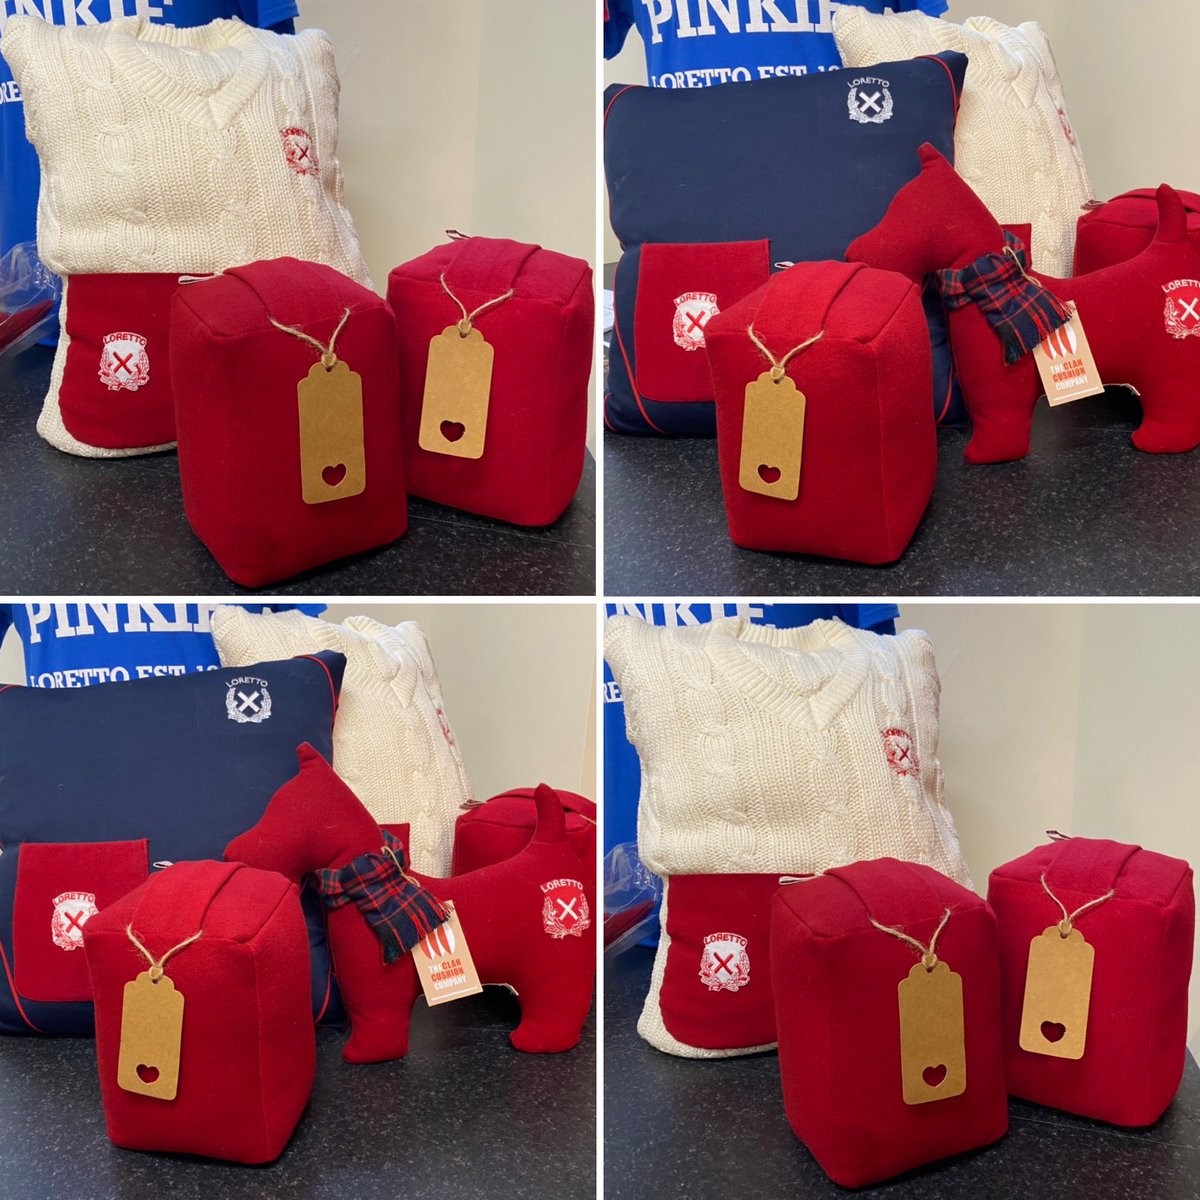 …while we are talking dogs, here’s an upcycling collaboration I’m working on with Loretto School, Musselburgh @LorettoHead where I make Scotties, cushions, doorstops, keyrings using redundant school uniform (sports kit, blazers etc) - hoping to work with other schools in 2022!😊